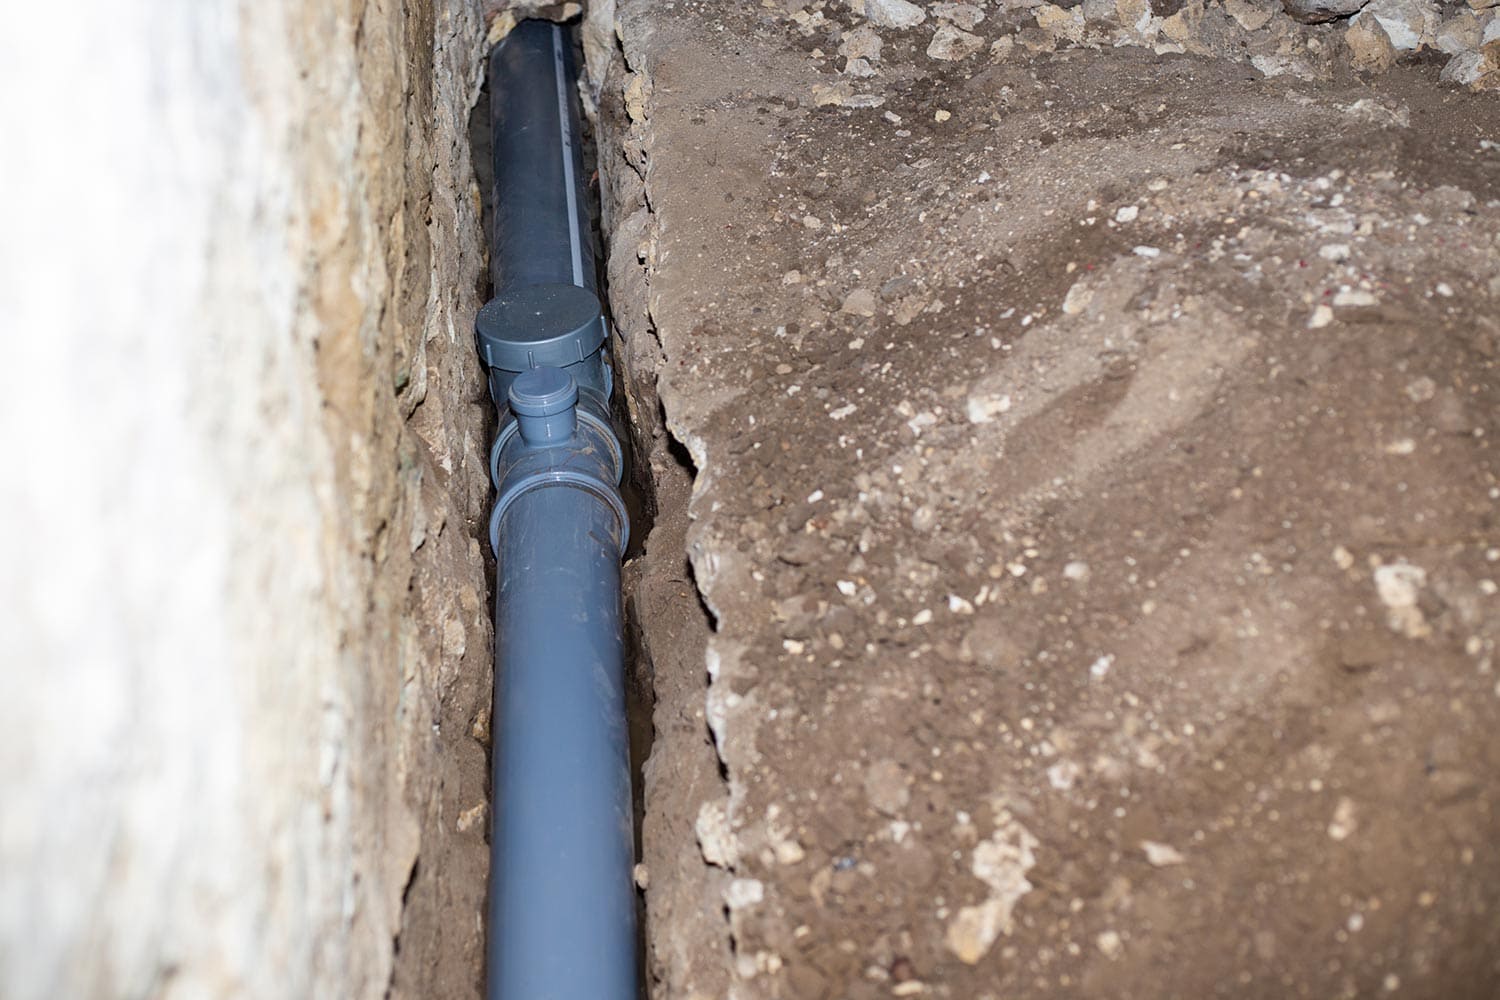 Lining sewage with plastic pipes, drainage of waste water from the house